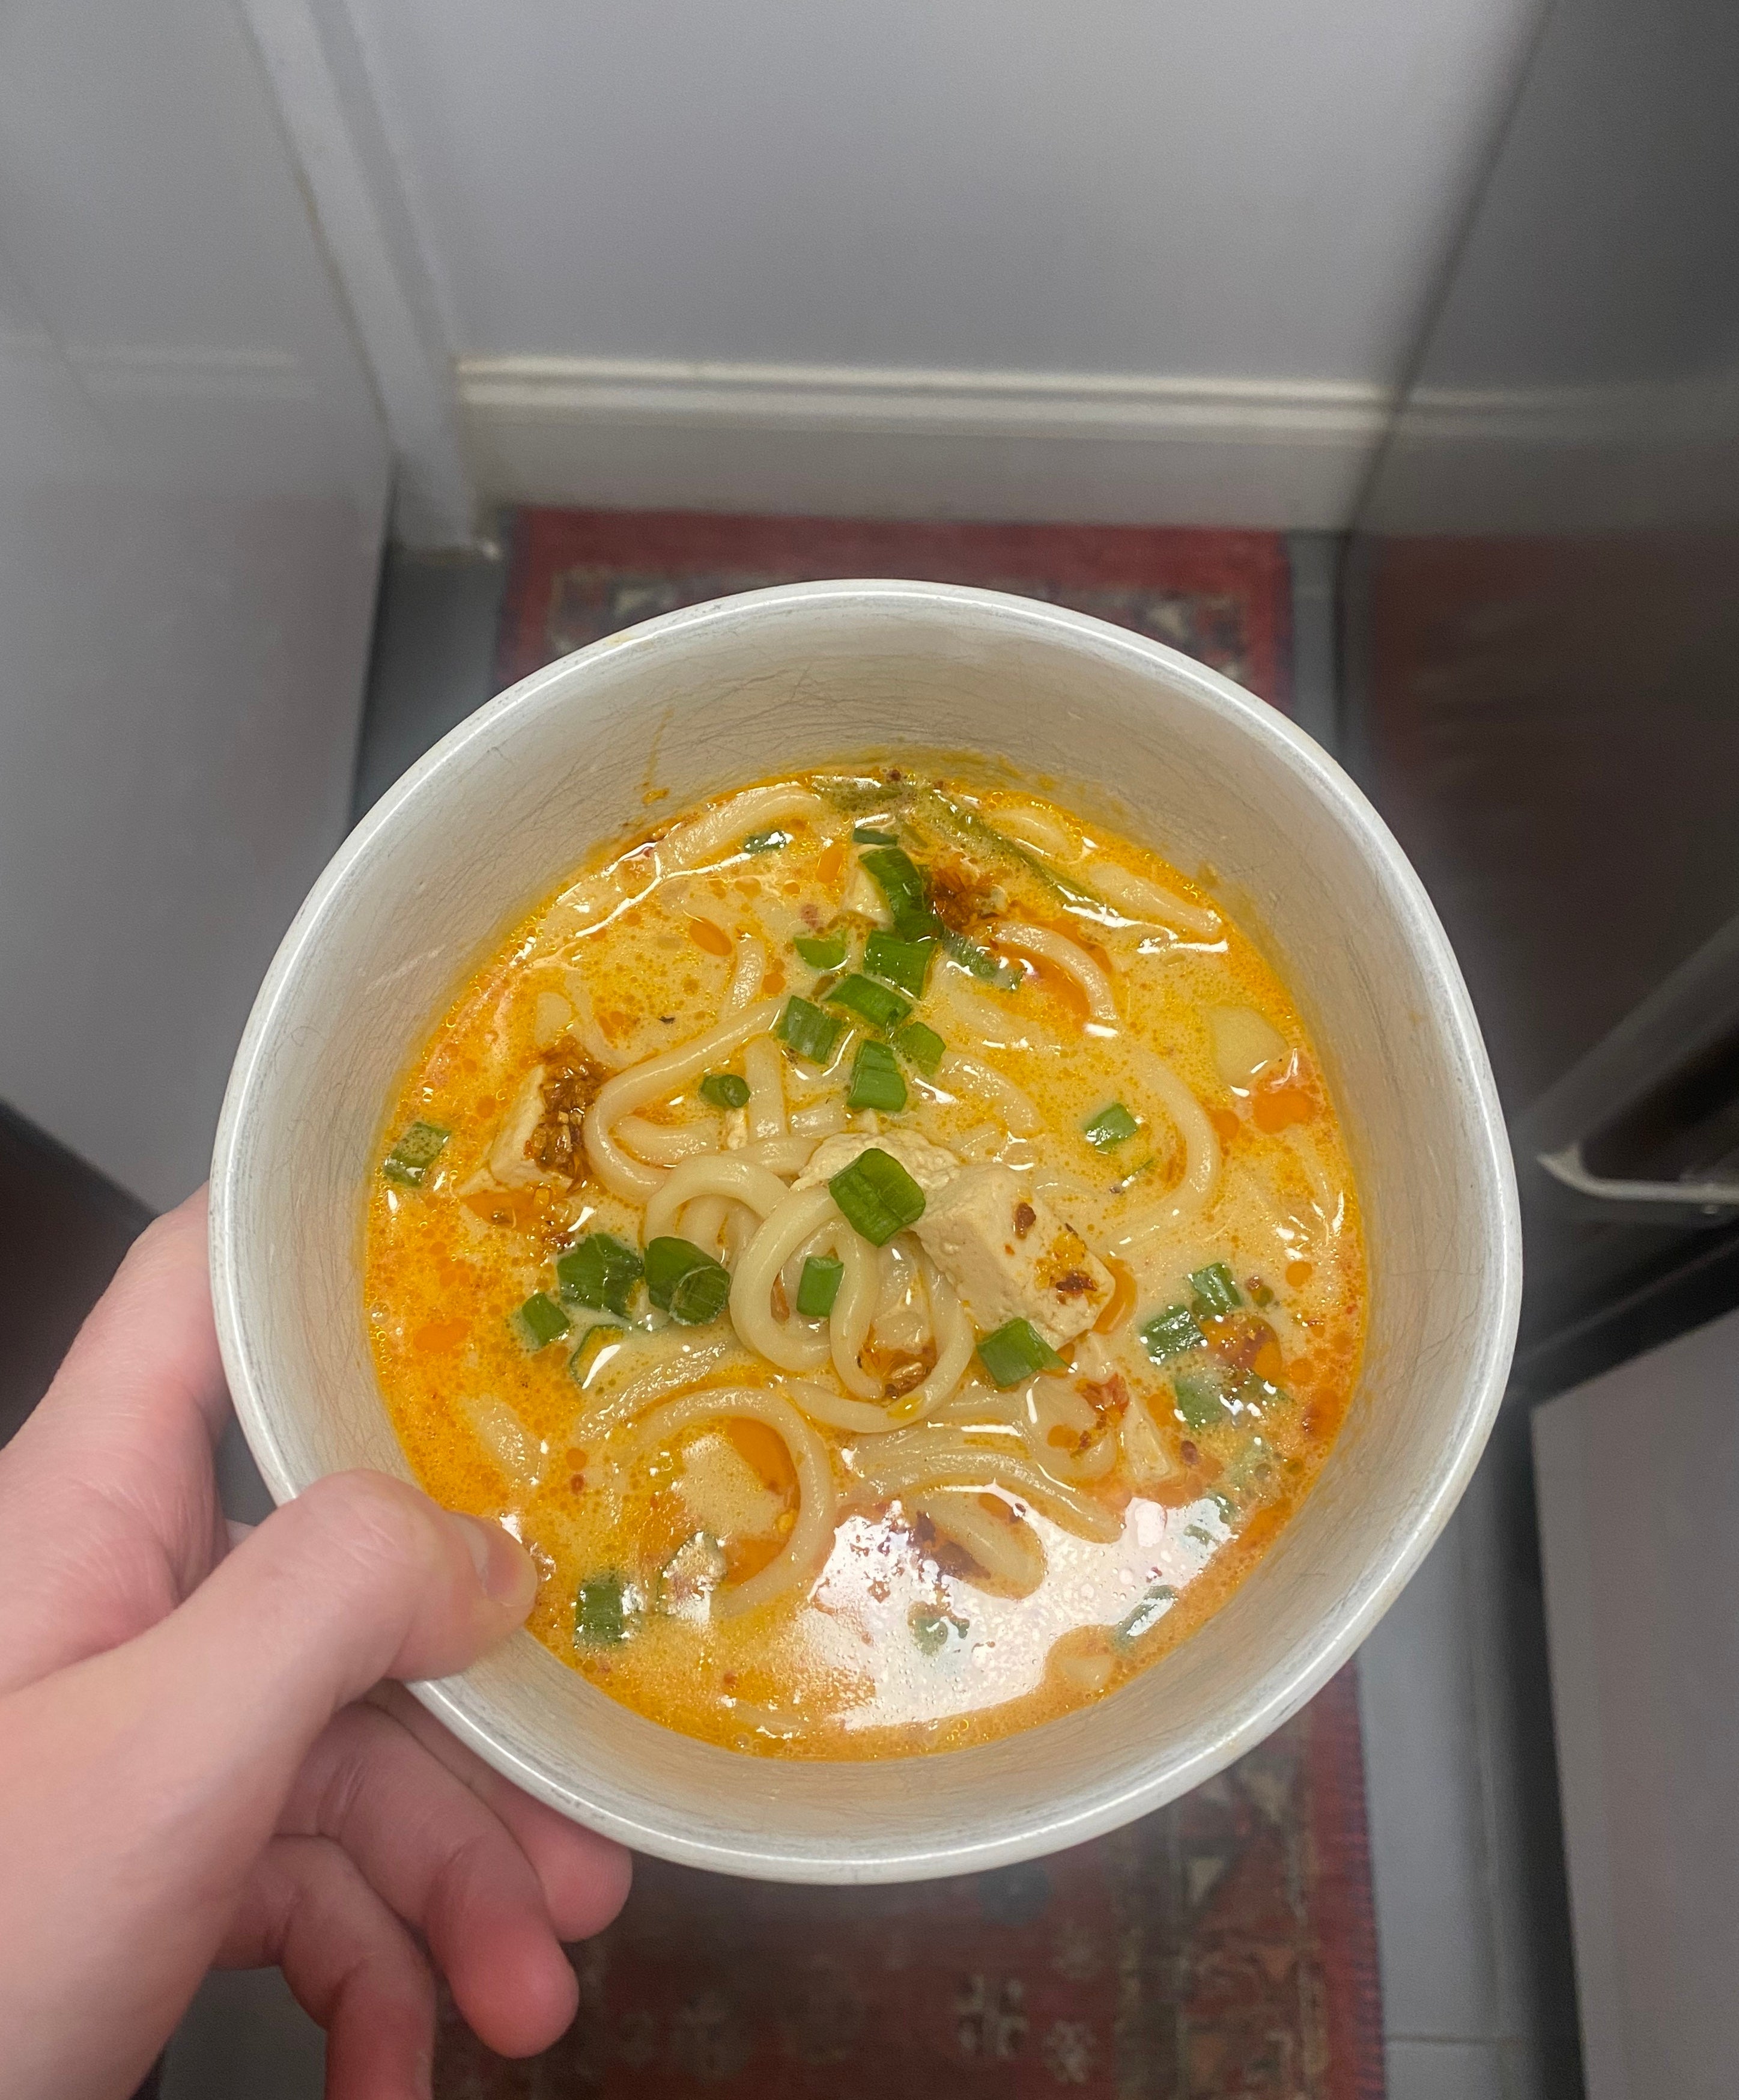 Hand holding a bowl of noodle soup with chopped green onions on top